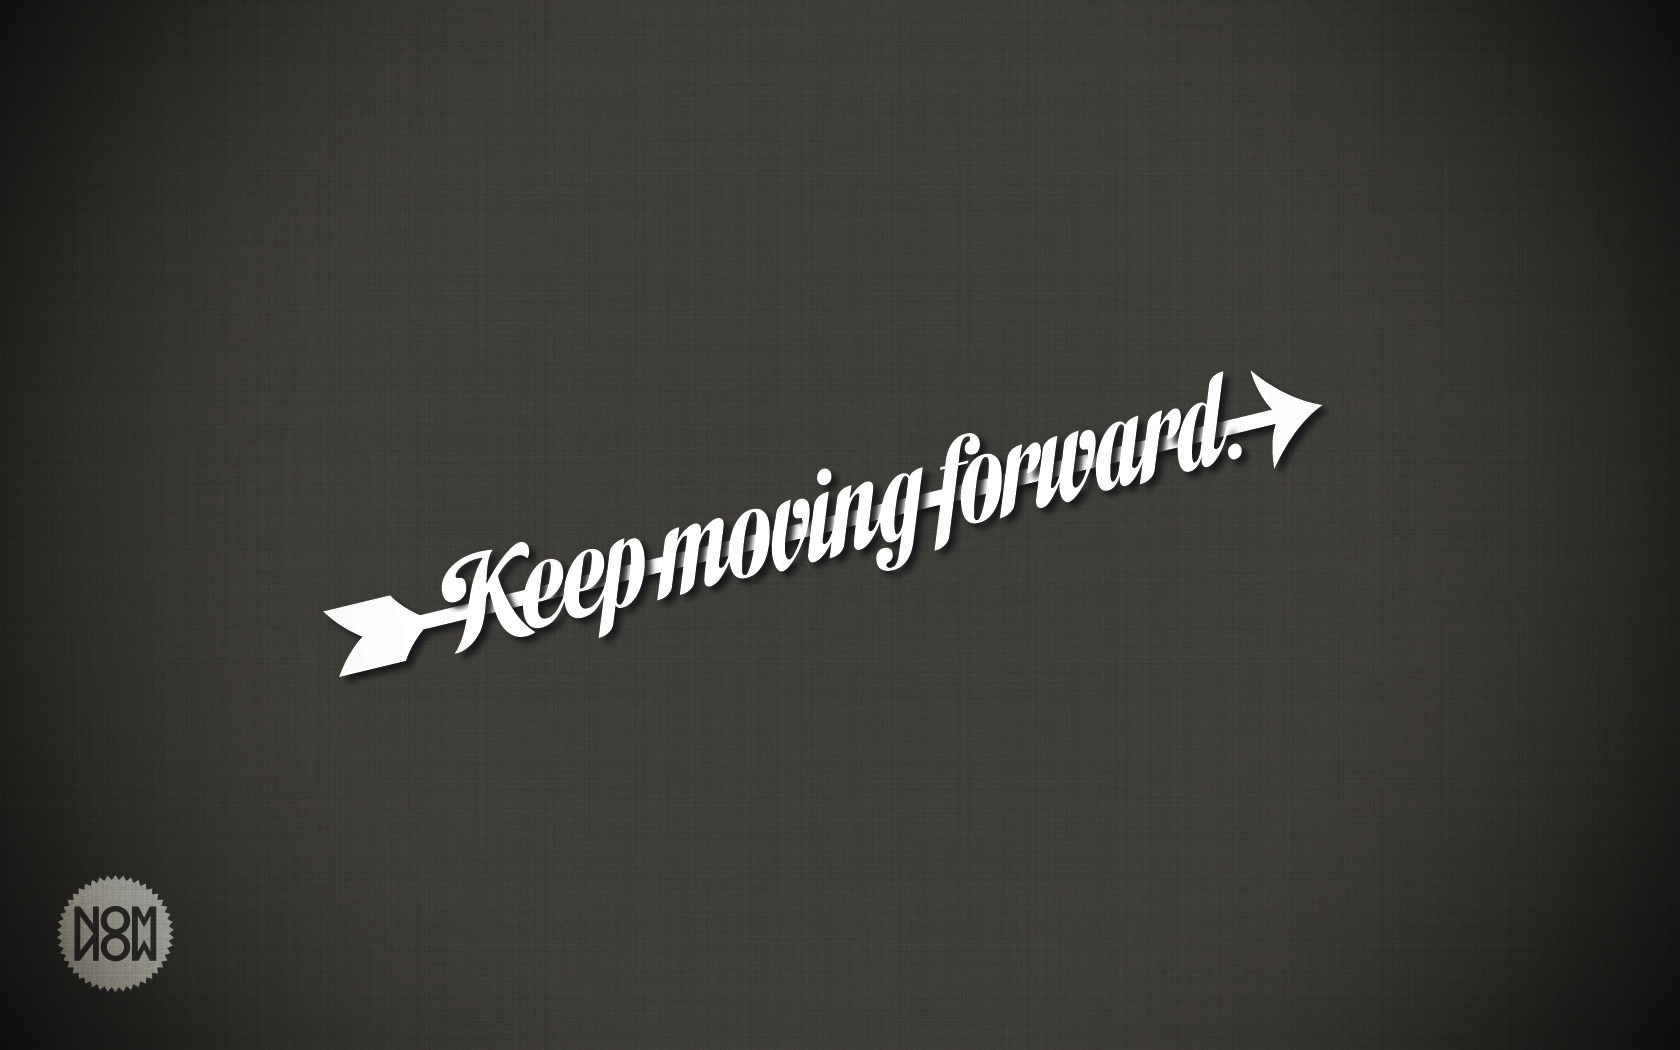 2610 Keep Moving Forward Images Stock Photos  Vectors  Shutterstock